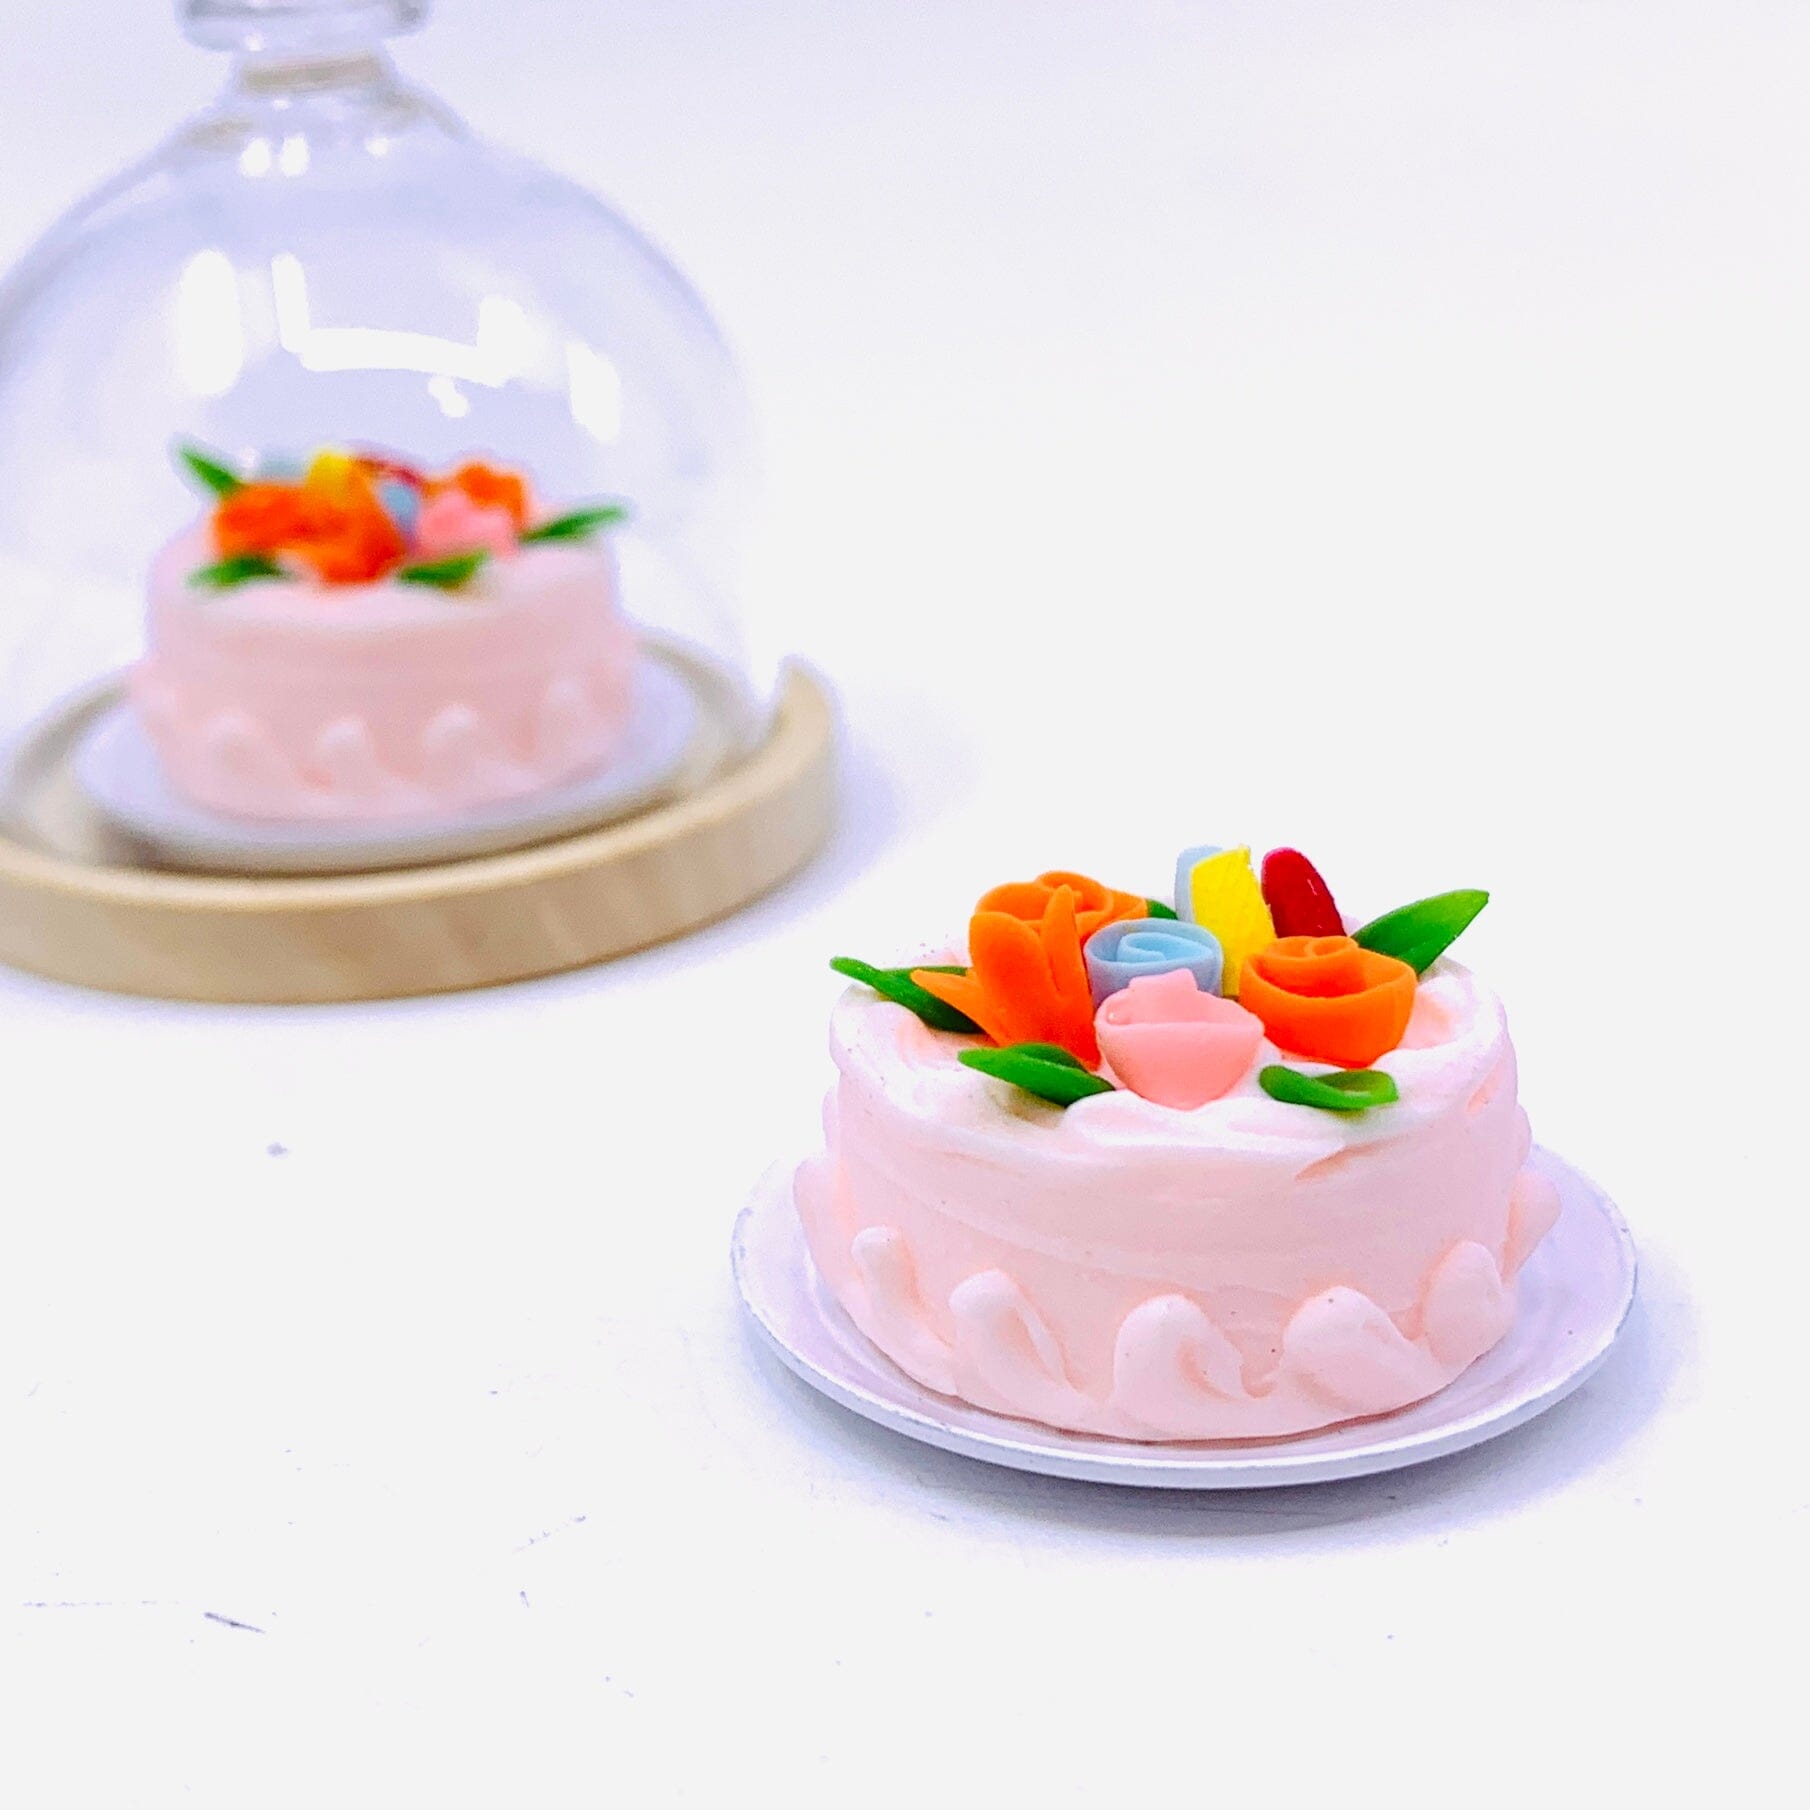 Tiniest Confectioner's Cake, Strawberry Miniature - 